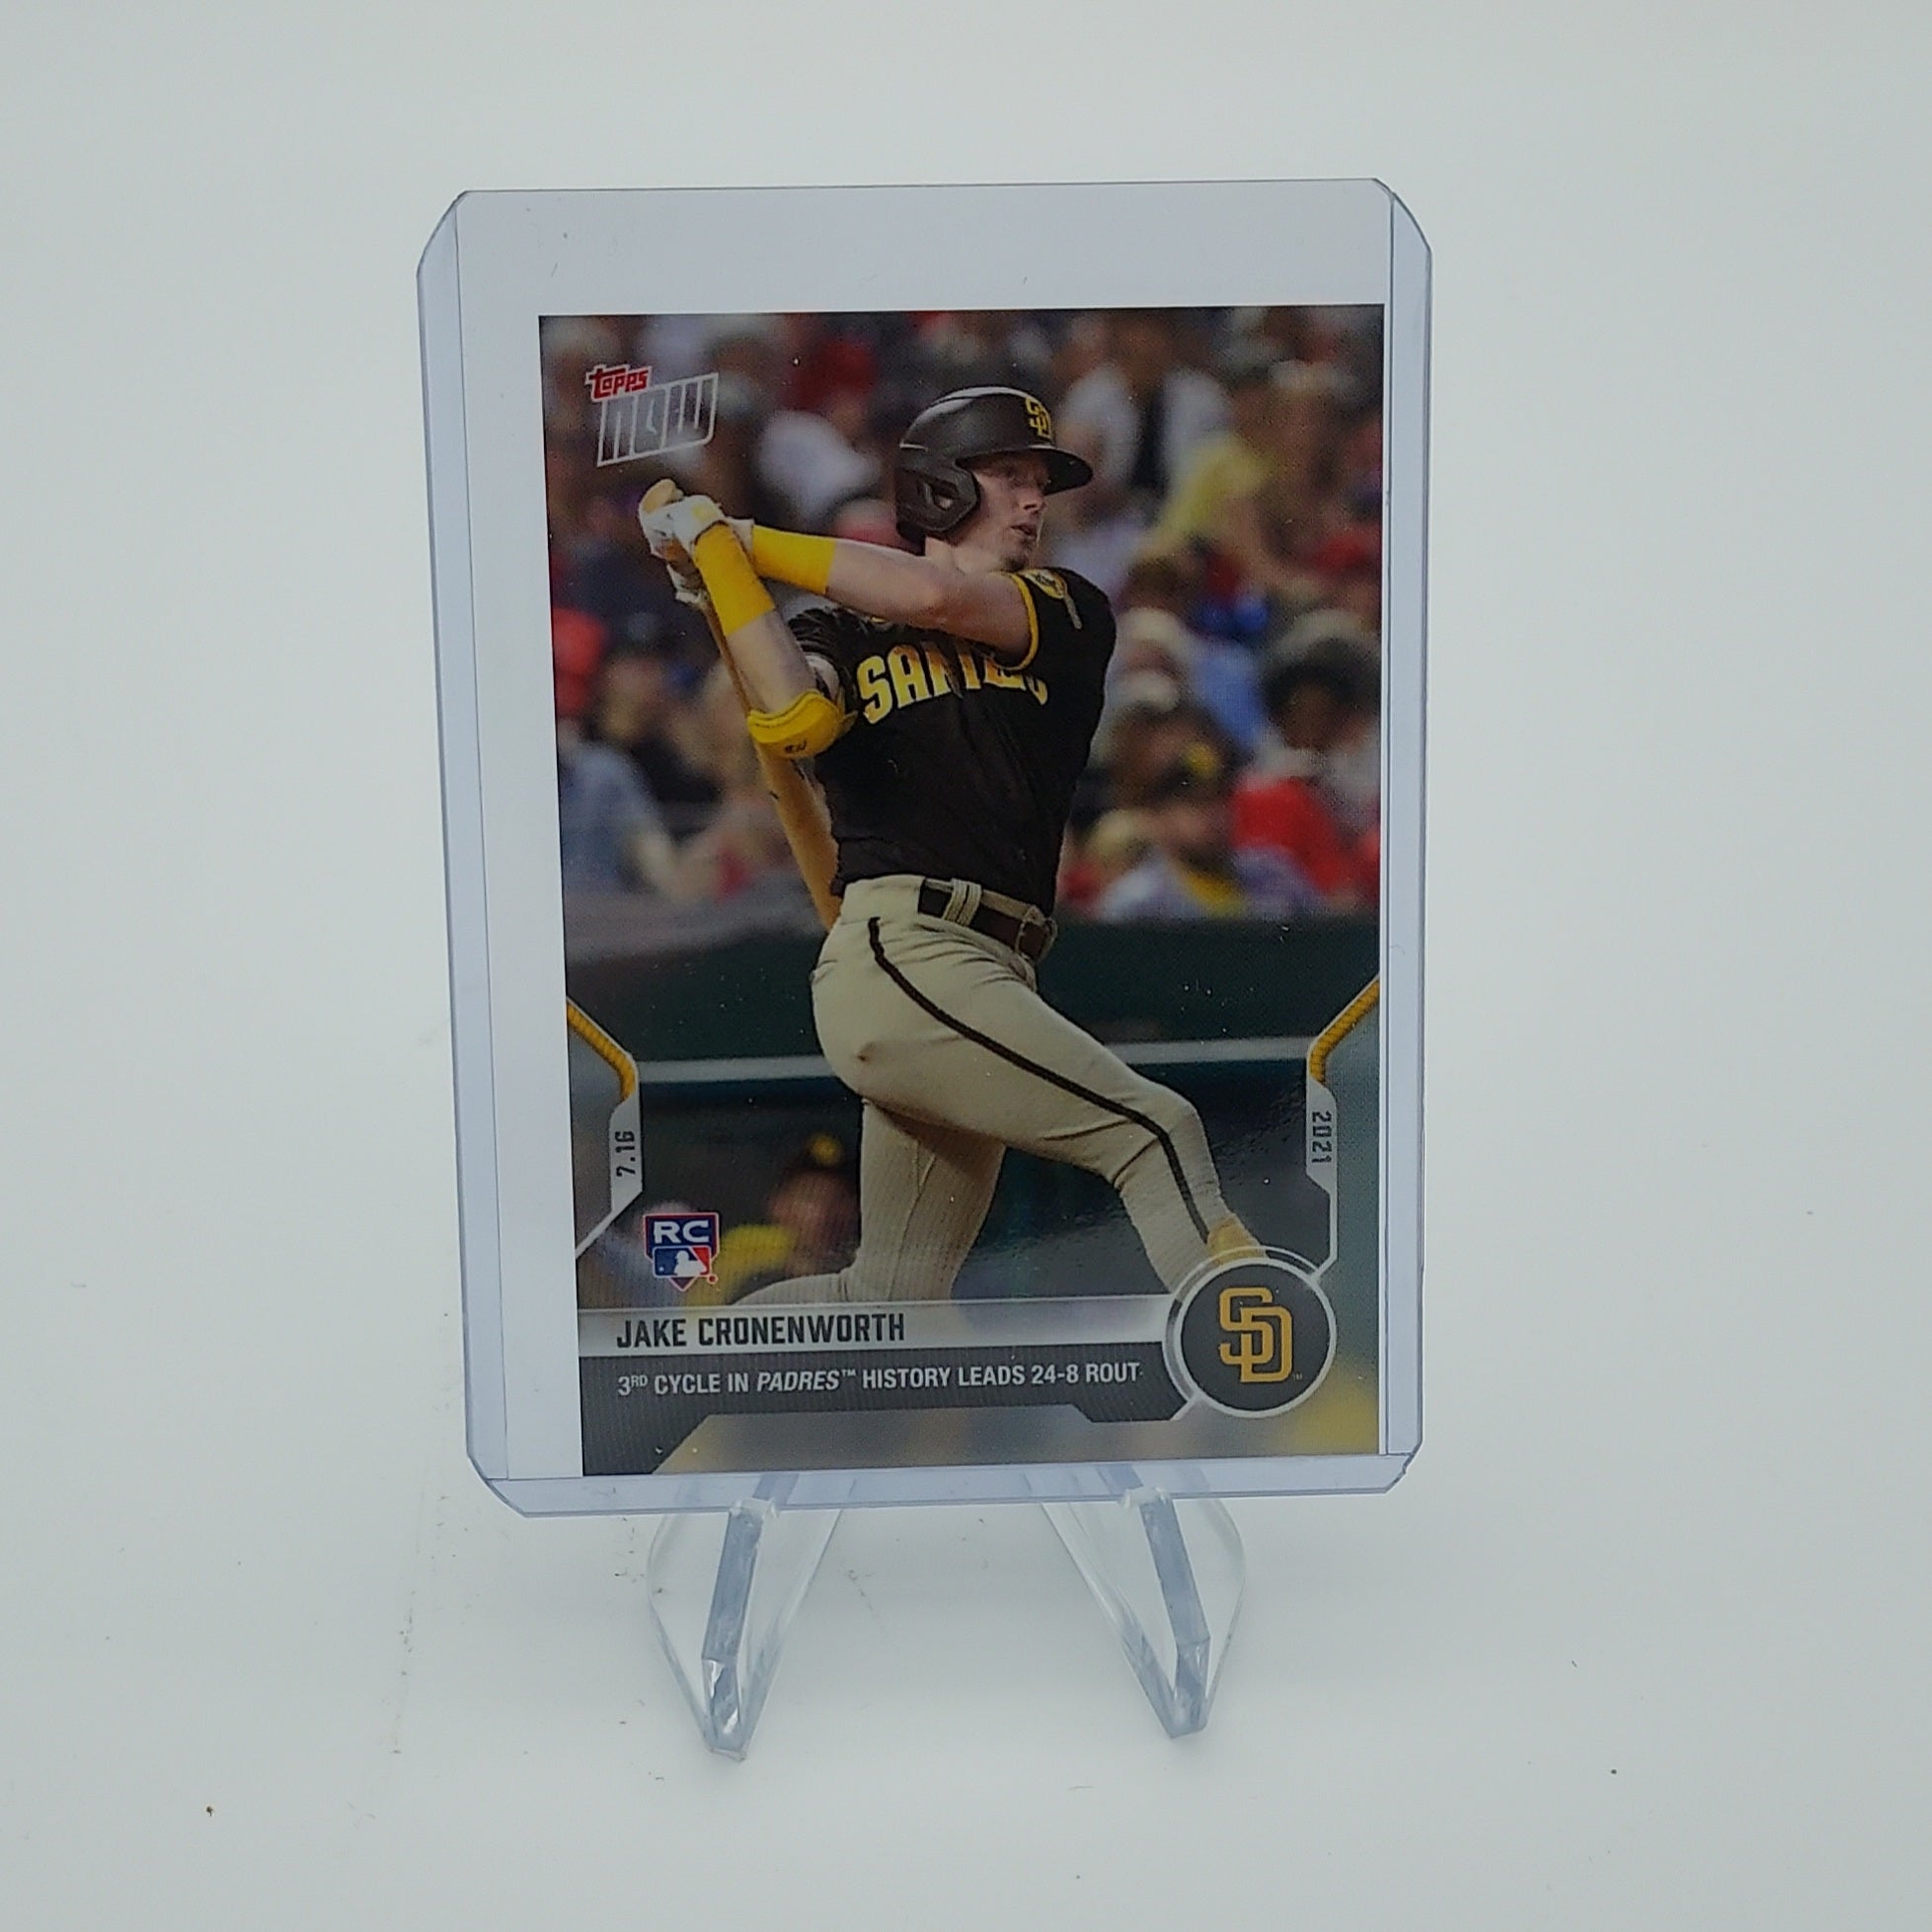 Jake Cronenworth Hits for Cycle - 2021 MLB TOPPS NOW Card 511 - PR: 3022